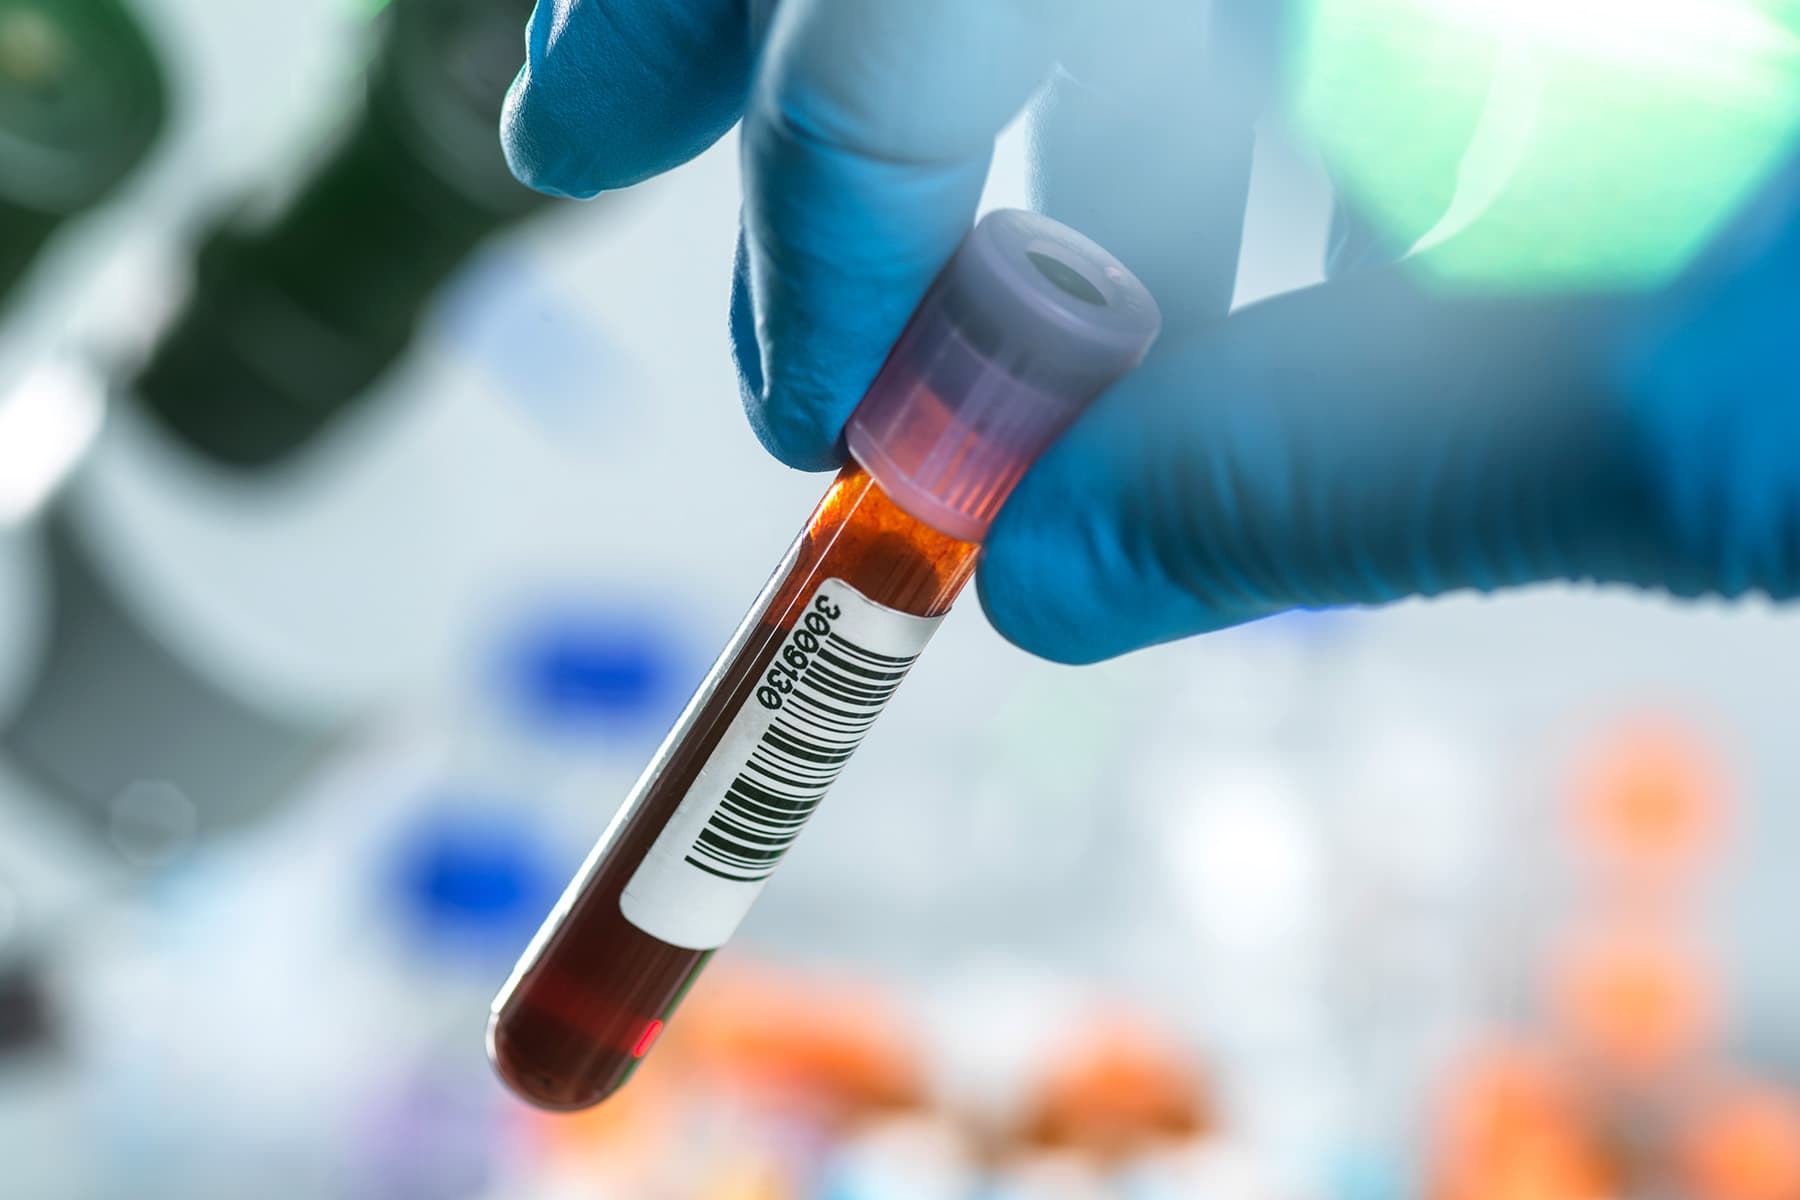 New blood test can detect Alzheimer’s disease early